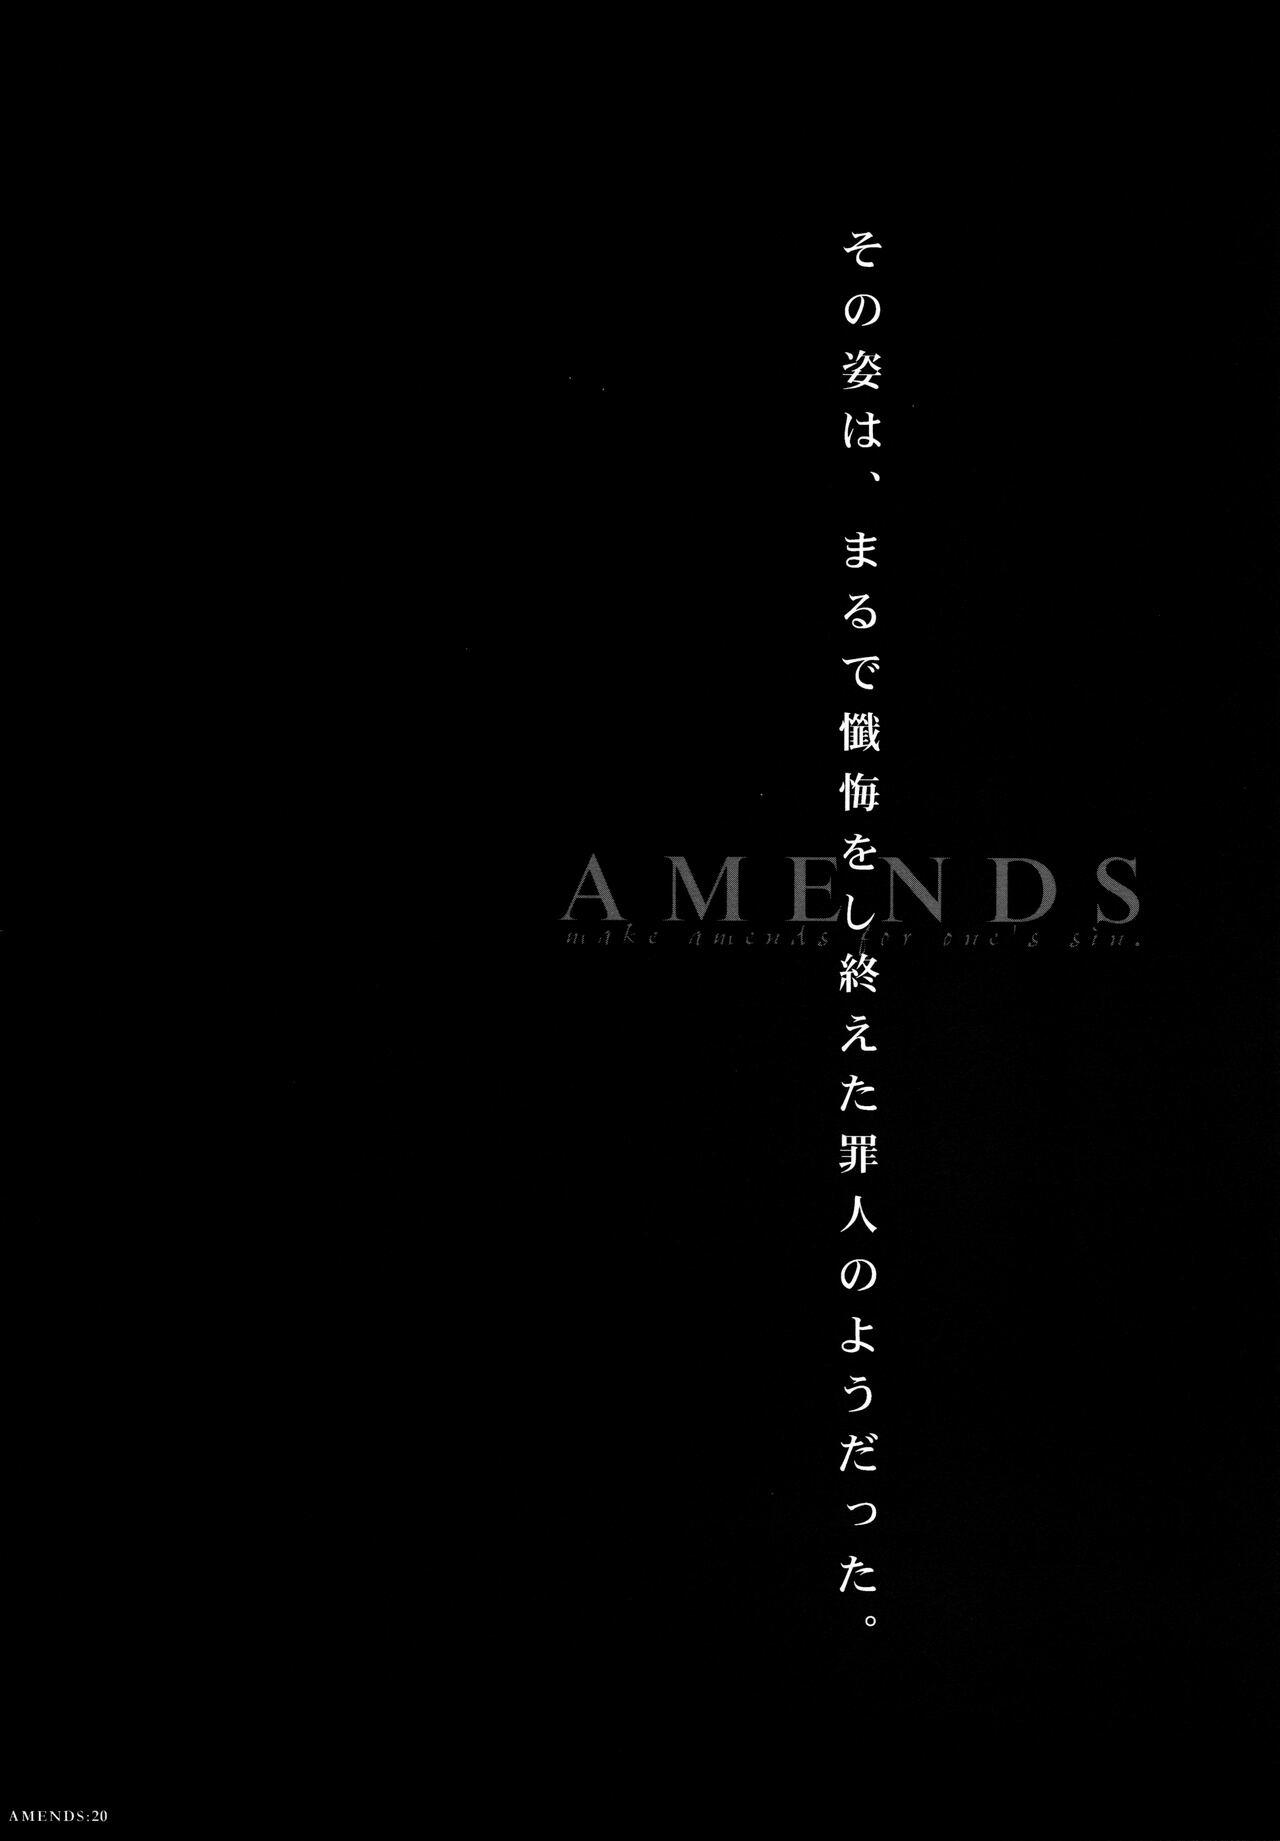 AMENDS - make amends for one's sin. 19